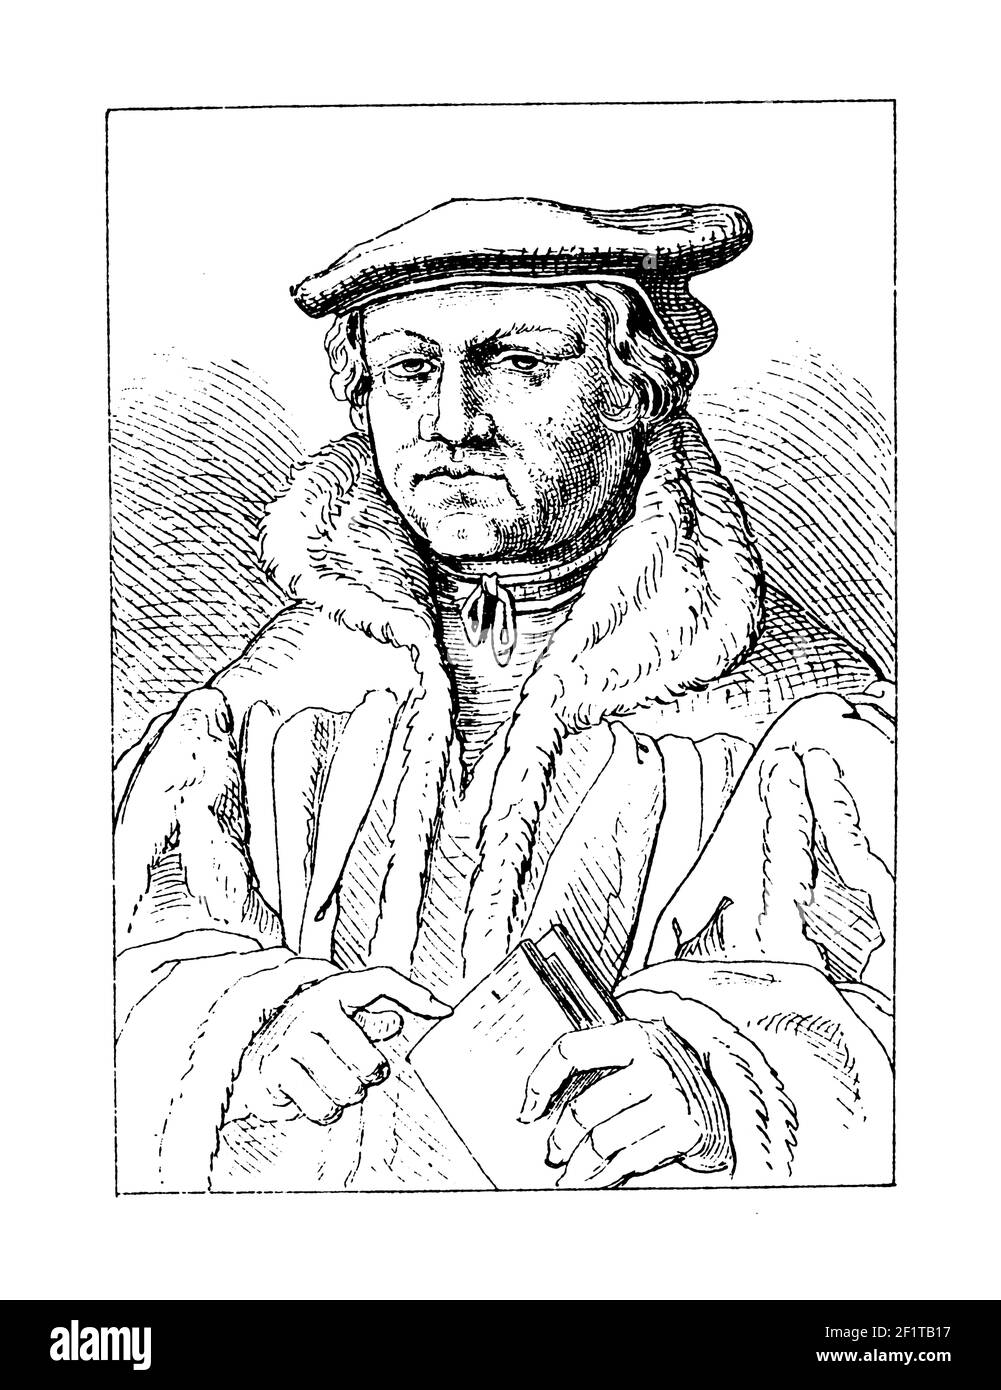 19th-century engraving of a portrait of Justus Jonas, German Protestant reformer. He was born on June 5, 1493 in Nordhausen, Thuringia, Germany and di Stock Photo